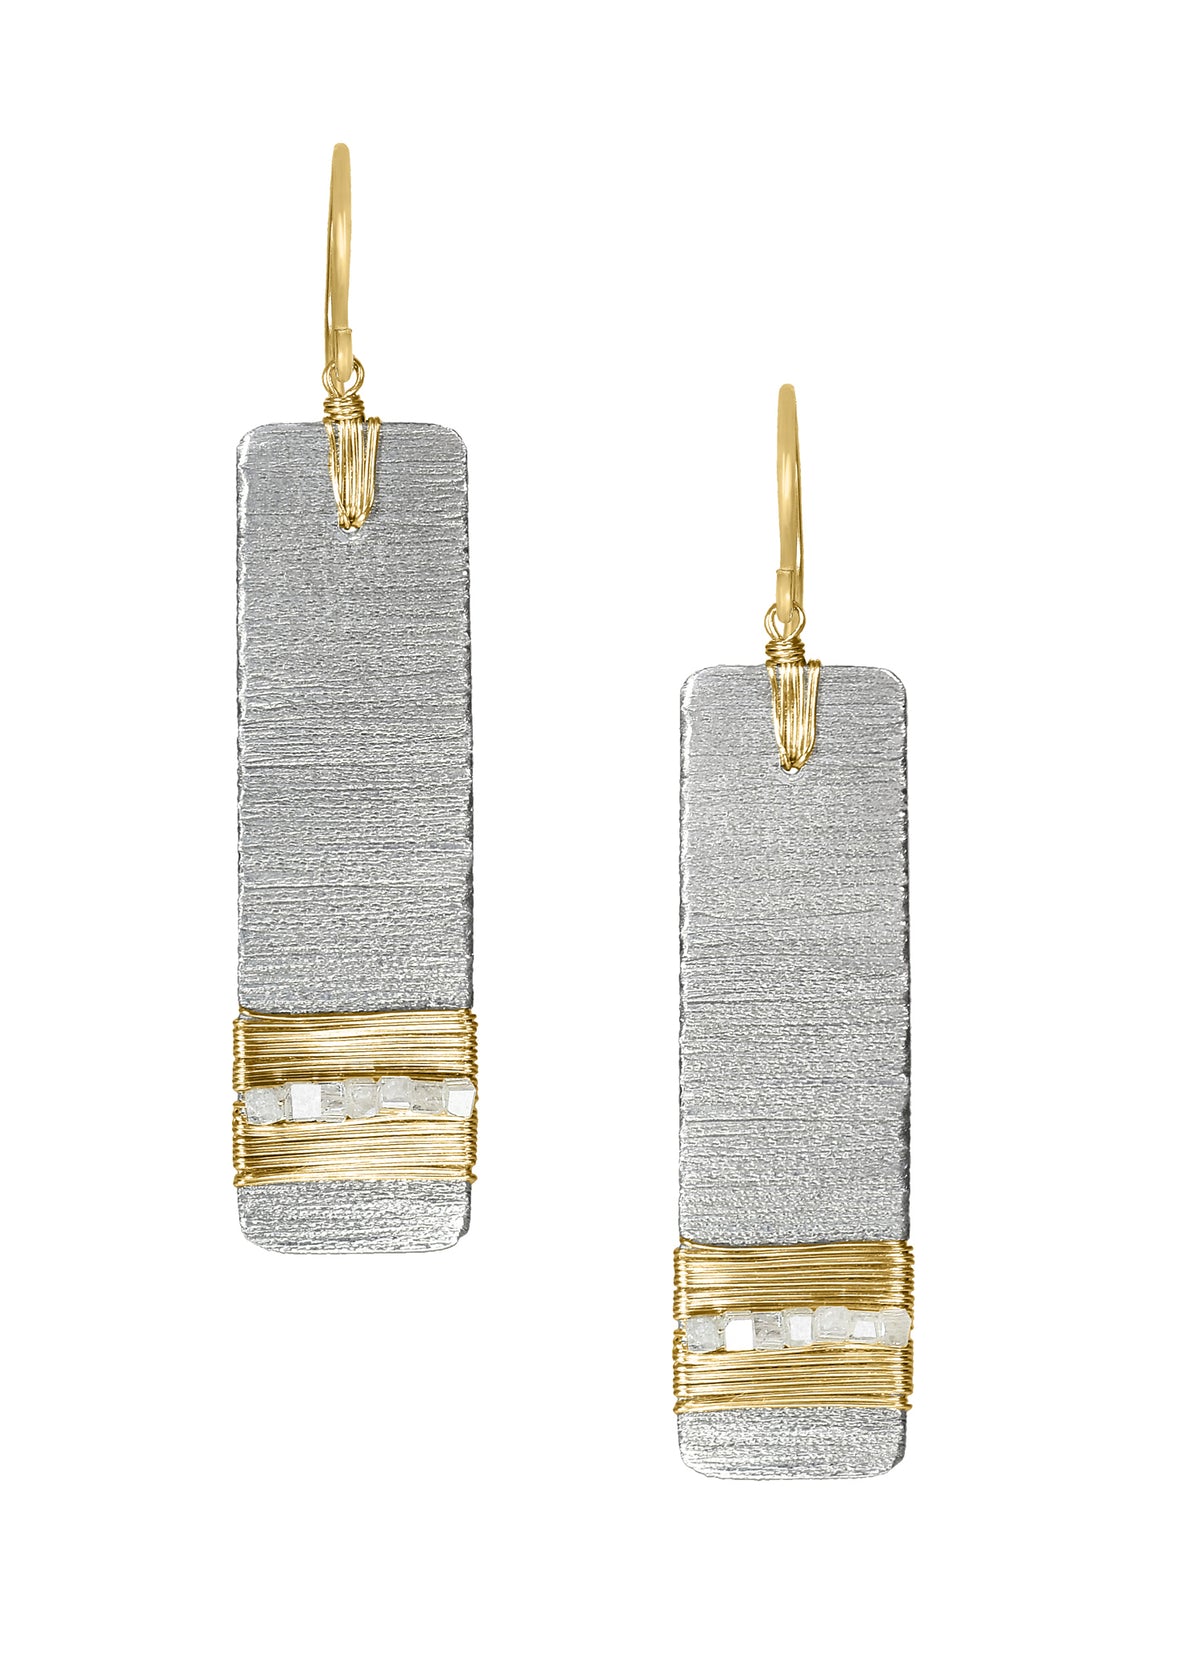 Diamond 14k gold Sterling silver Mixed metal Earrings measure 2&quot; in length (including the ear wires) and 7/16&quot; in width Handmade in our Los Angeles studio